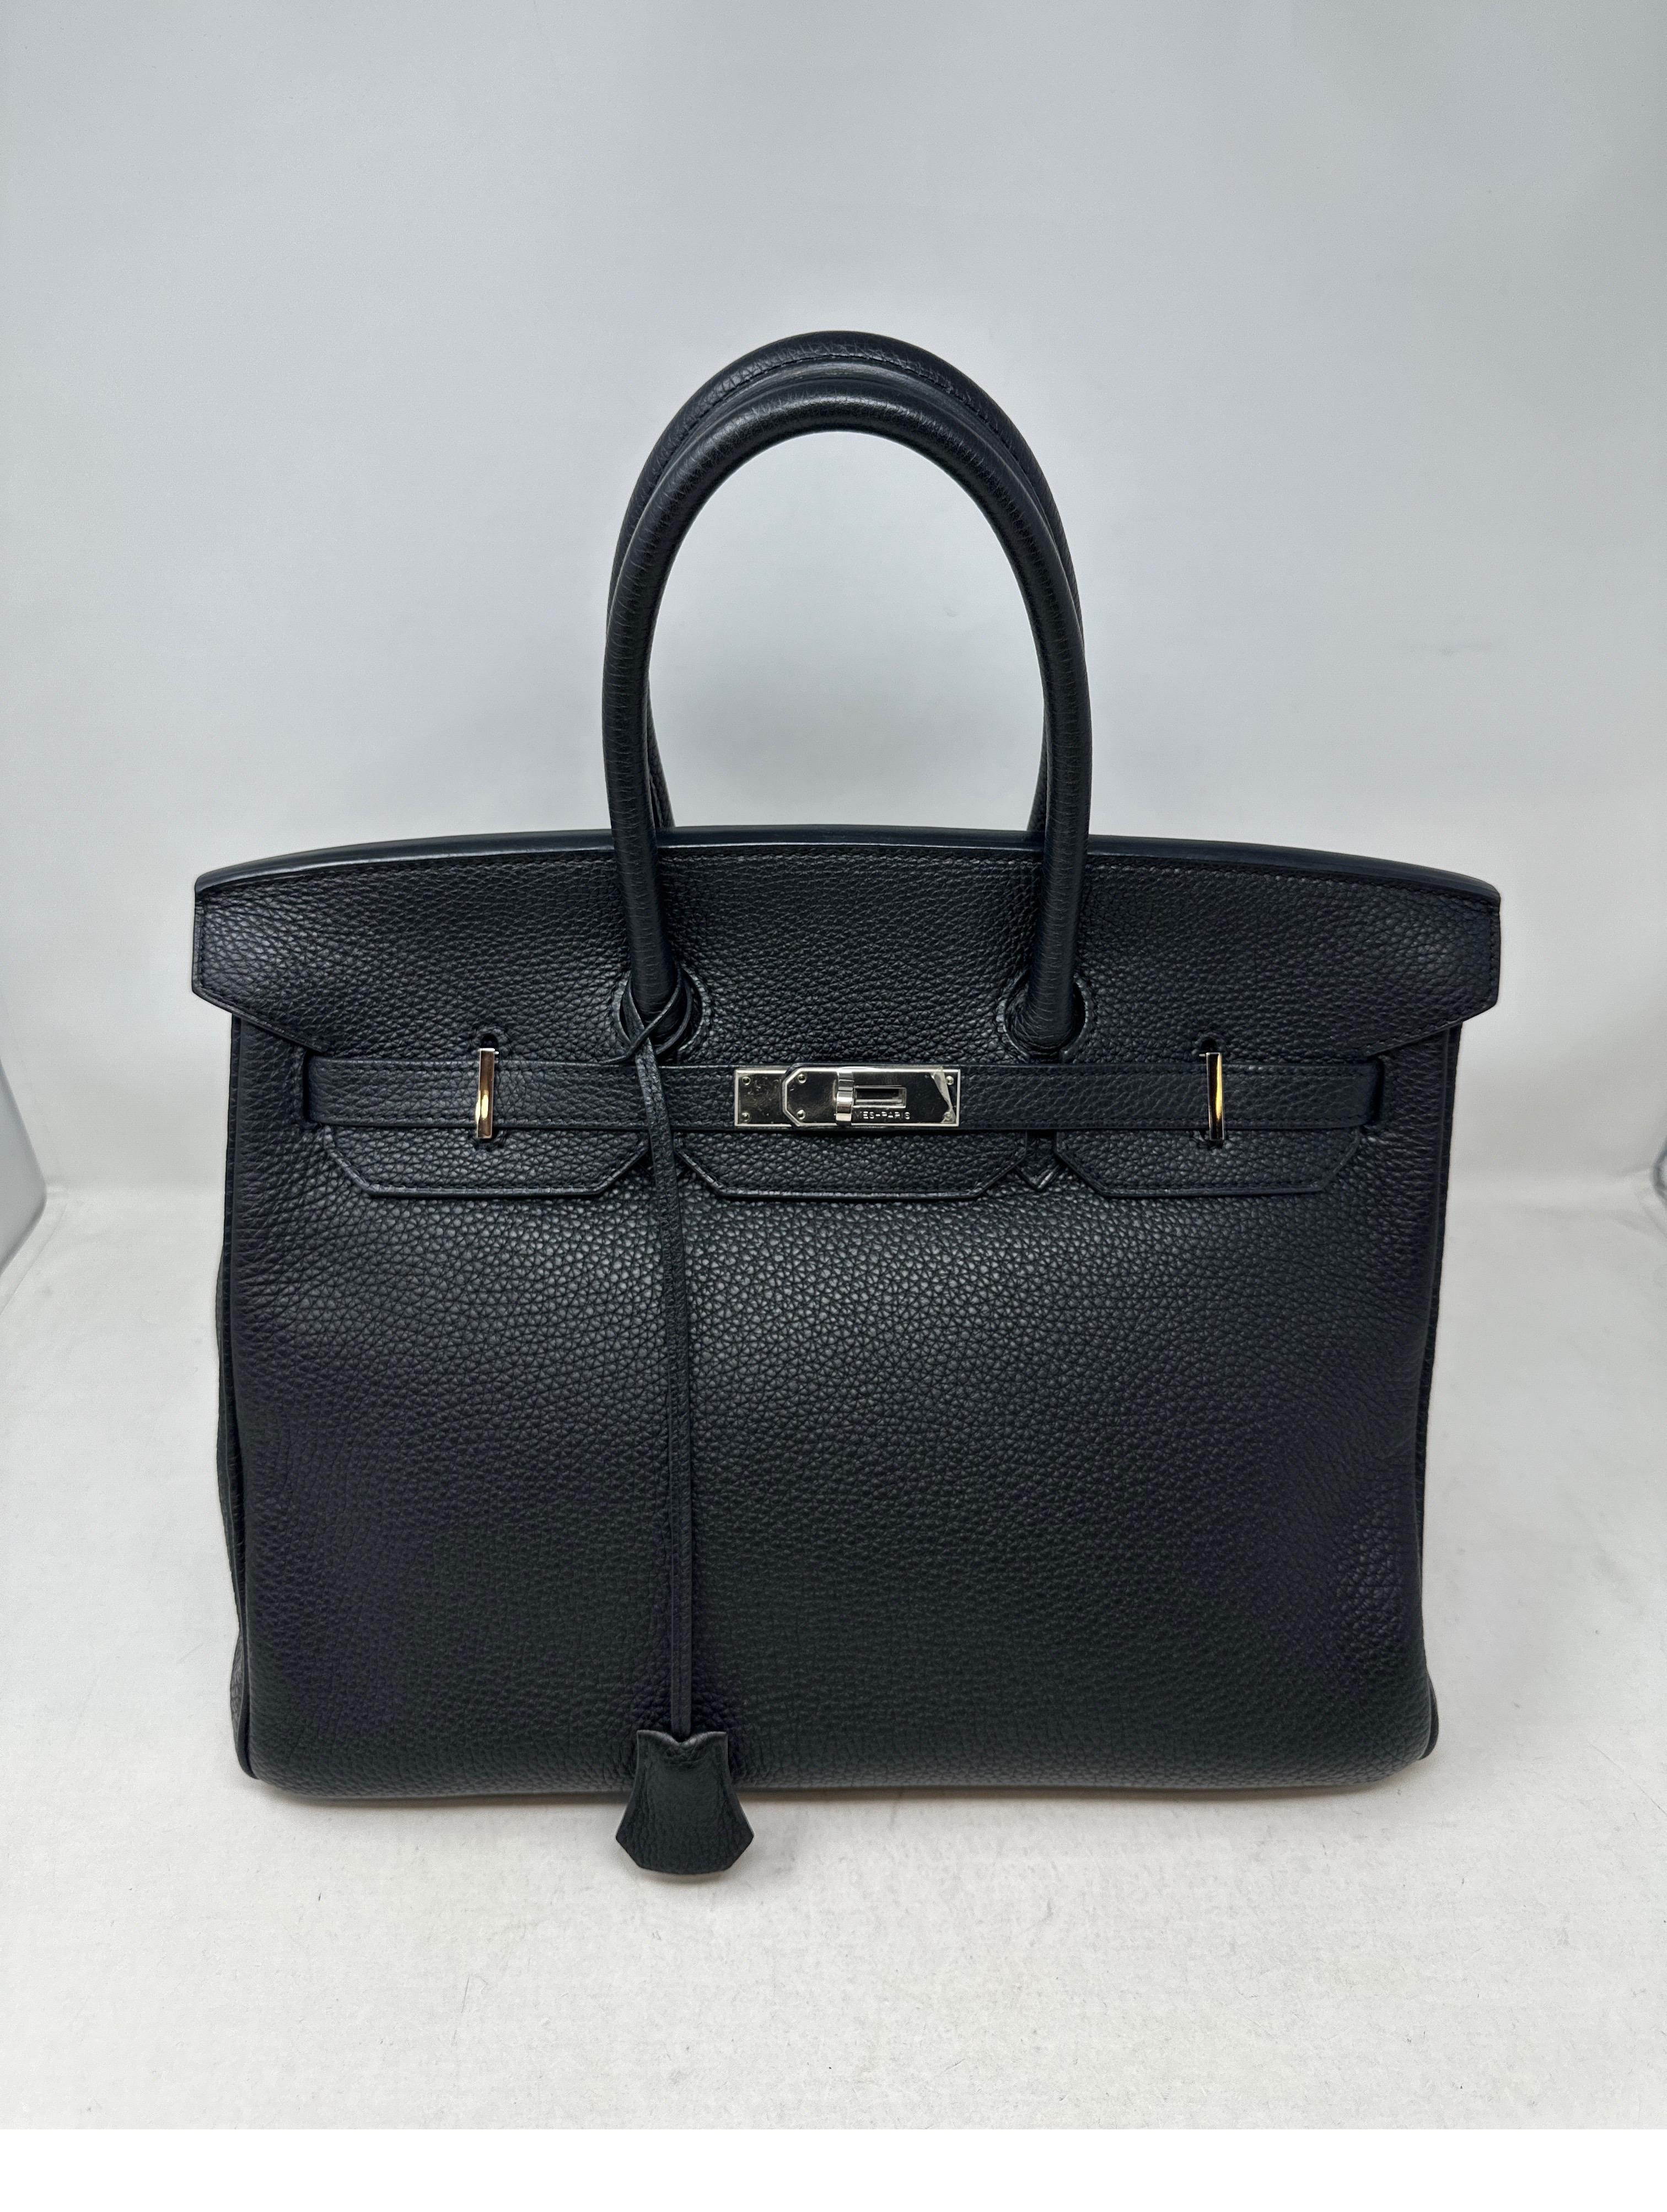 Hermes Black Birkin 35 Bag. Classic black with palladium silver hardware. Excellent condition. Togo leather. Interior clean. Includes clochette, lock, keys, and dust bag. Guaranteed authentic. 